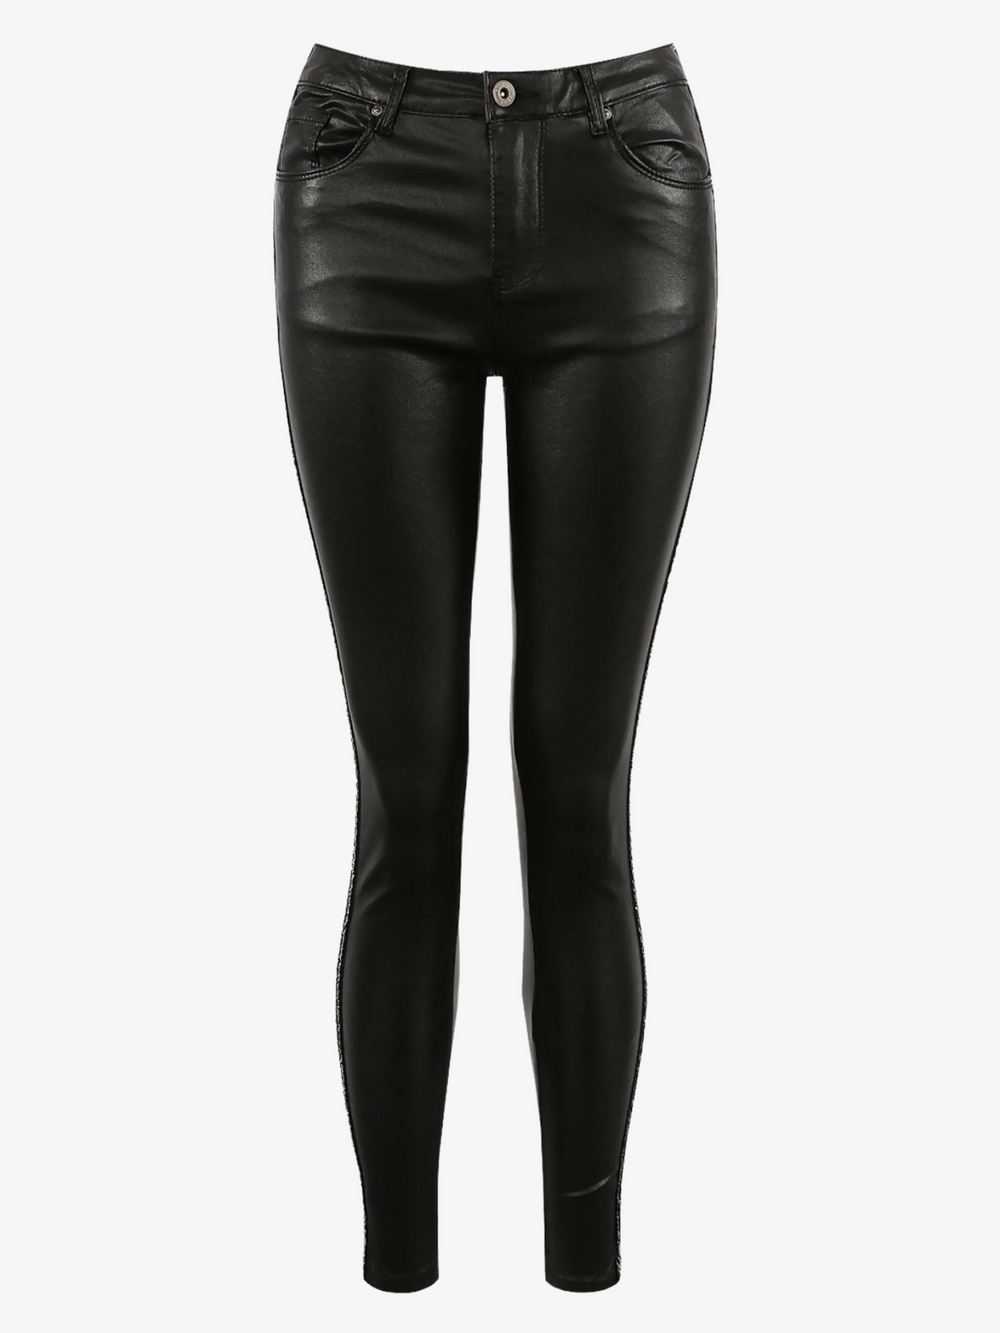 Ghost manequin wears matte faux leather skinny  jeans, with a metallic sequin strip down the sides. The low rise jeggings has front and back pockets.  The front of the low rise matte faux leather jeggings can be seen.